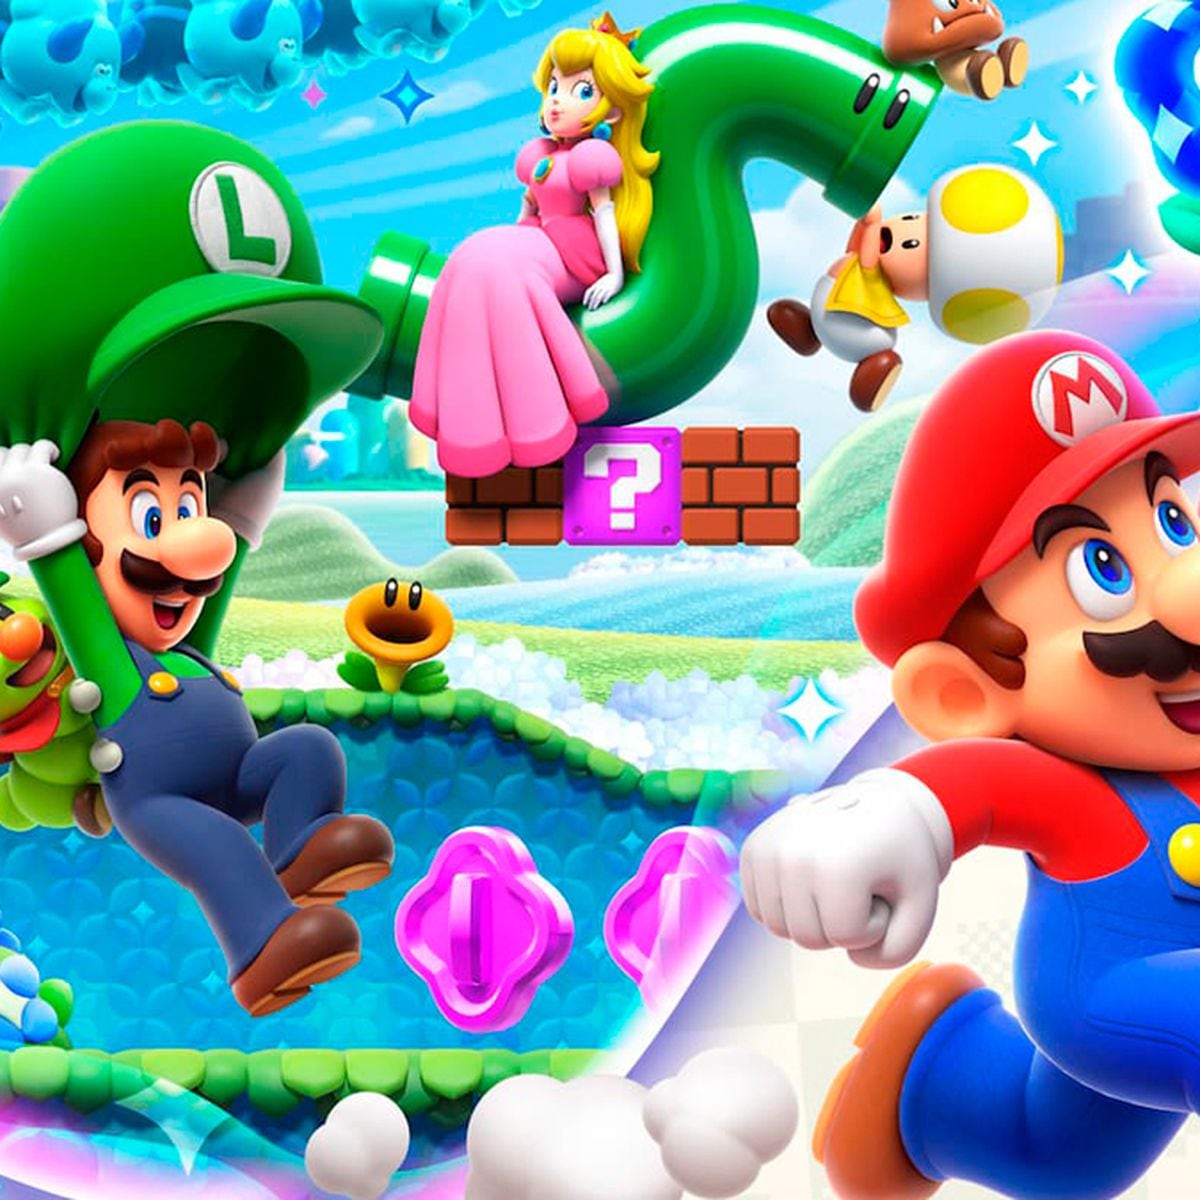 Super Mario Bros. Wonder' Is What Happens When Devs Have Time to